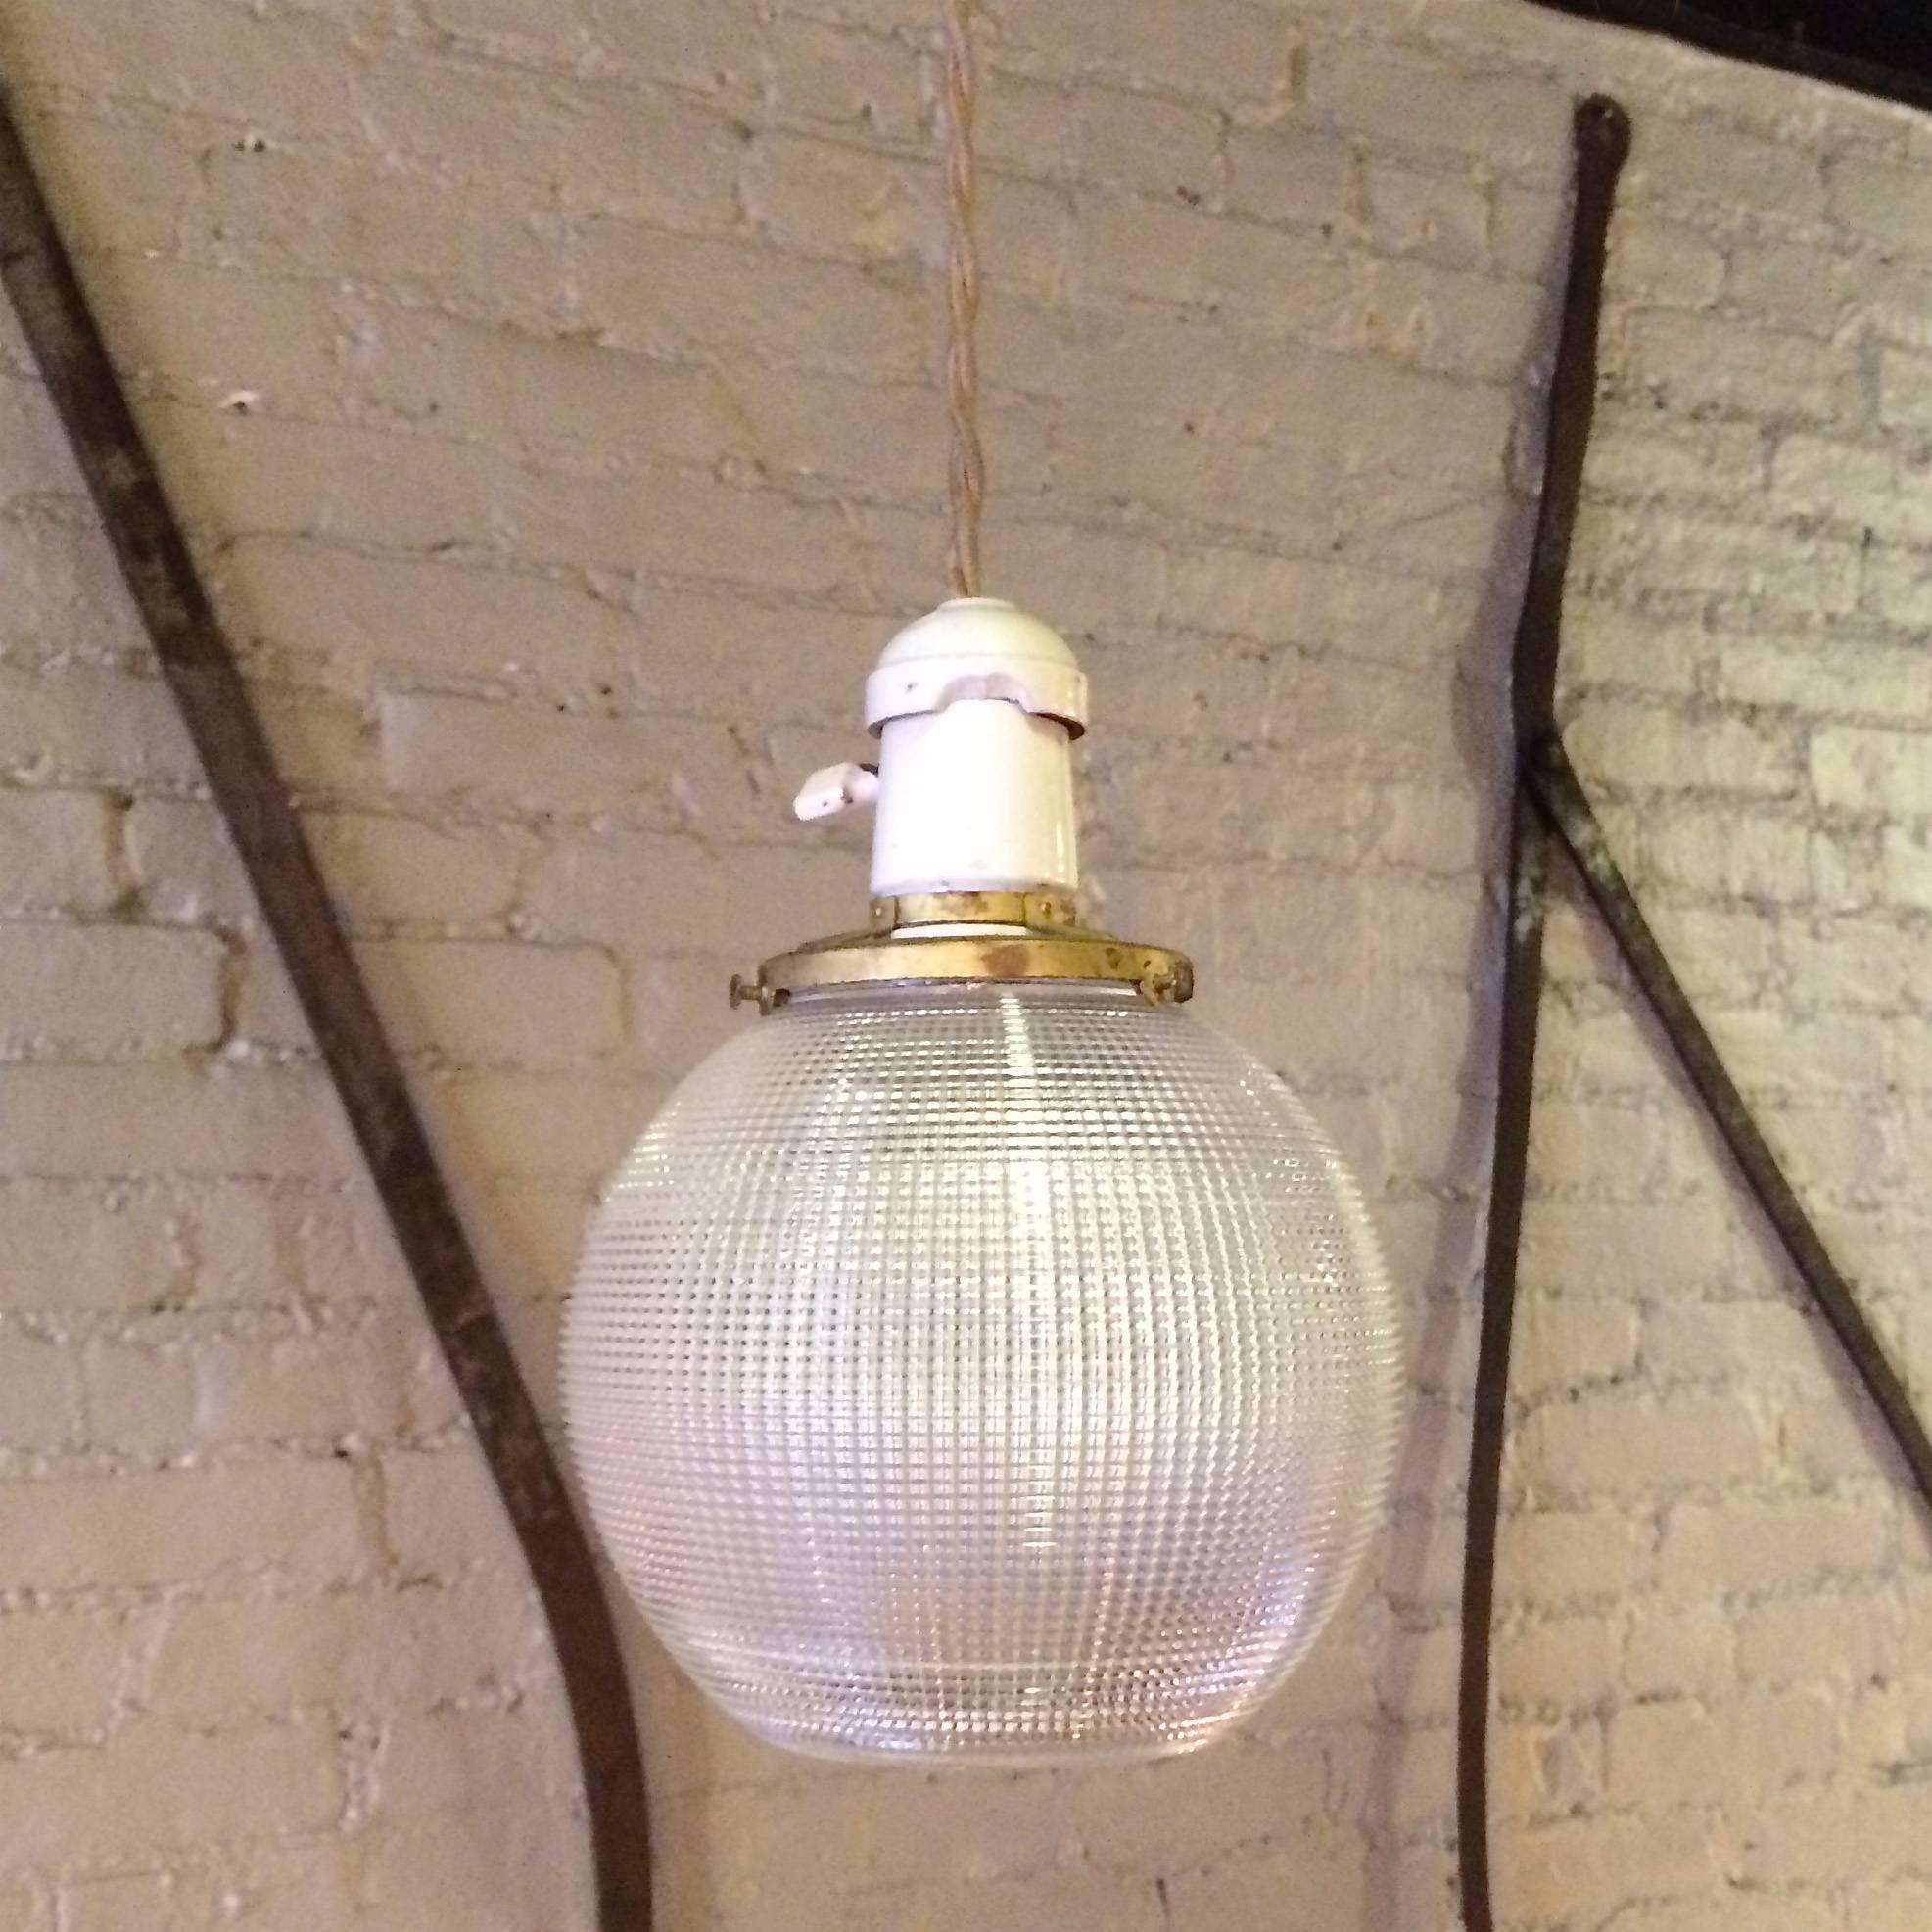 Pair of holophane glass, open globe, pendant lights with porcelain sockets and brass fitters are newly wired with 50in. of beige braided cloth cords. Each pendant can take up to 150 watt bulbs.